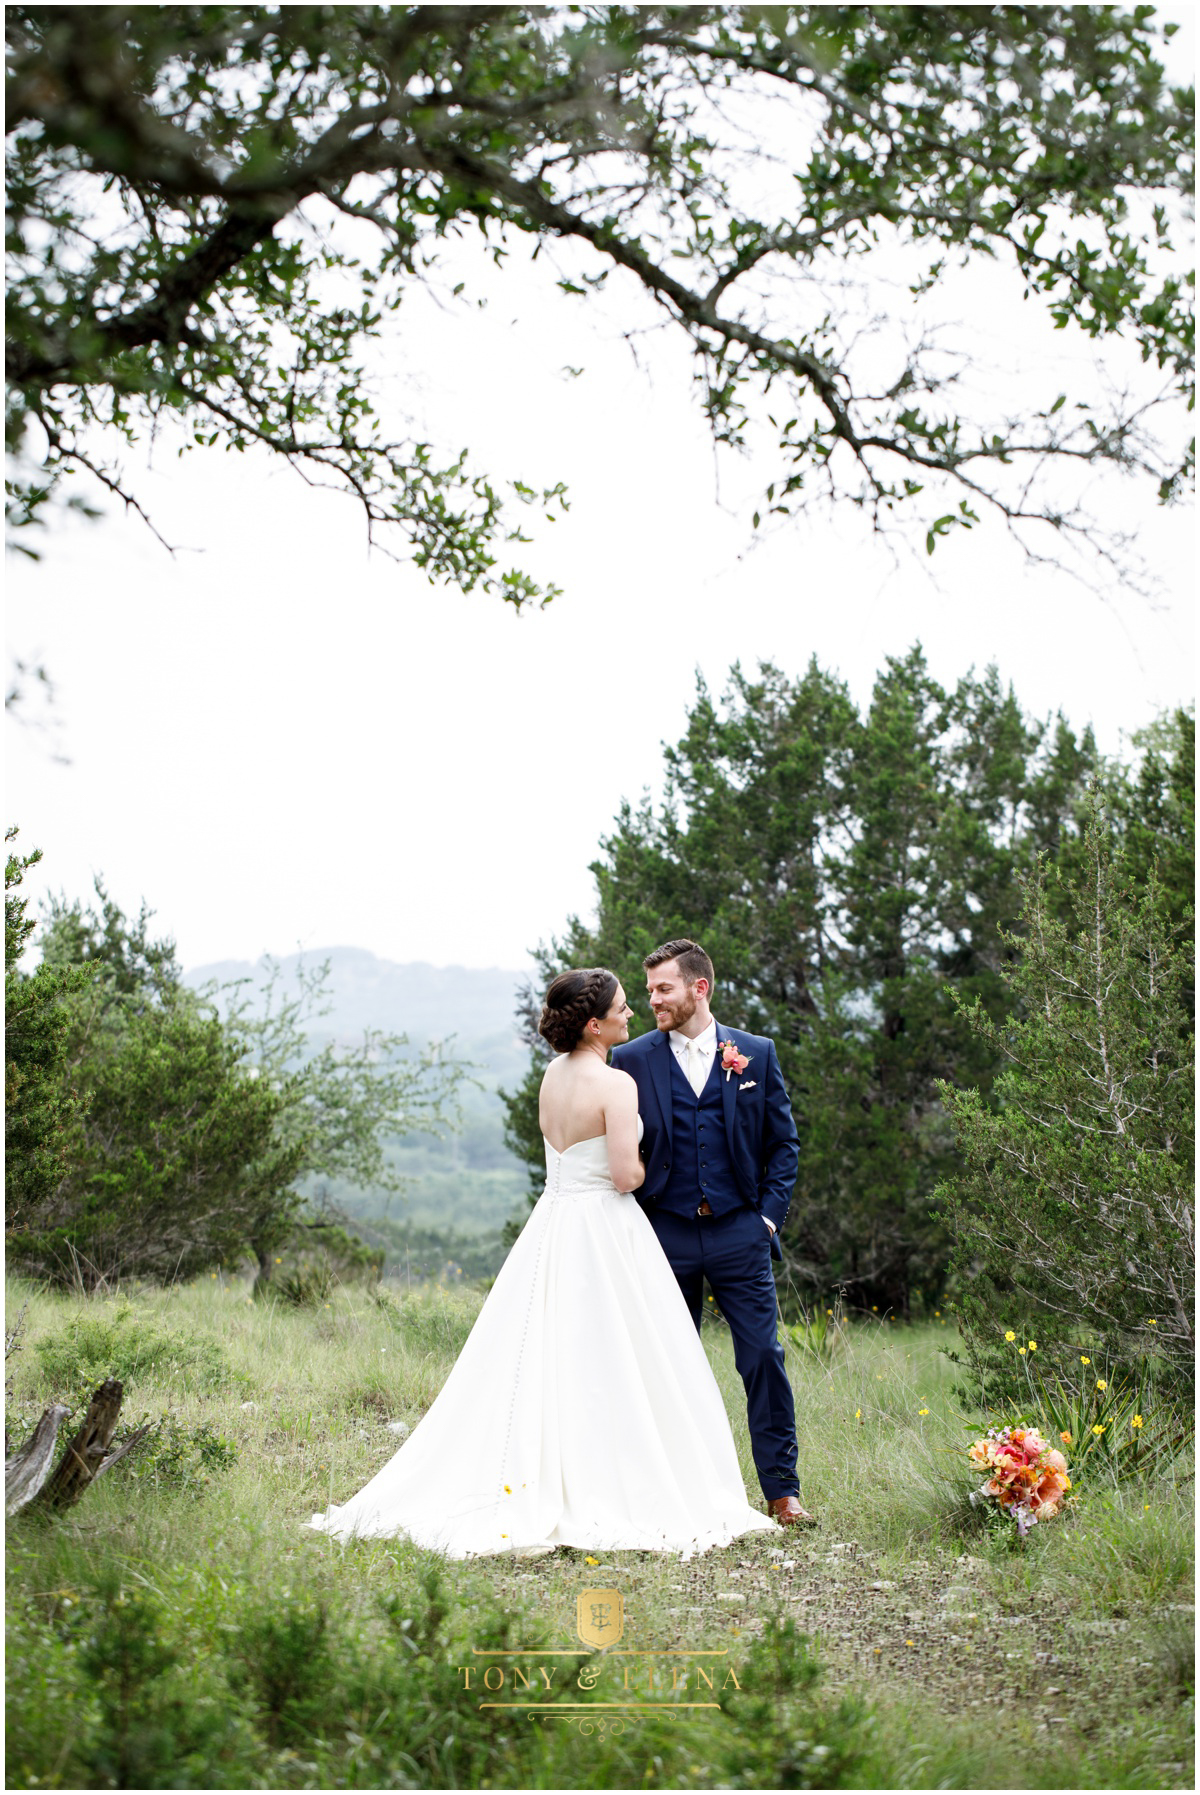 best wedding photographer in austin terrace club bride groom hill country view